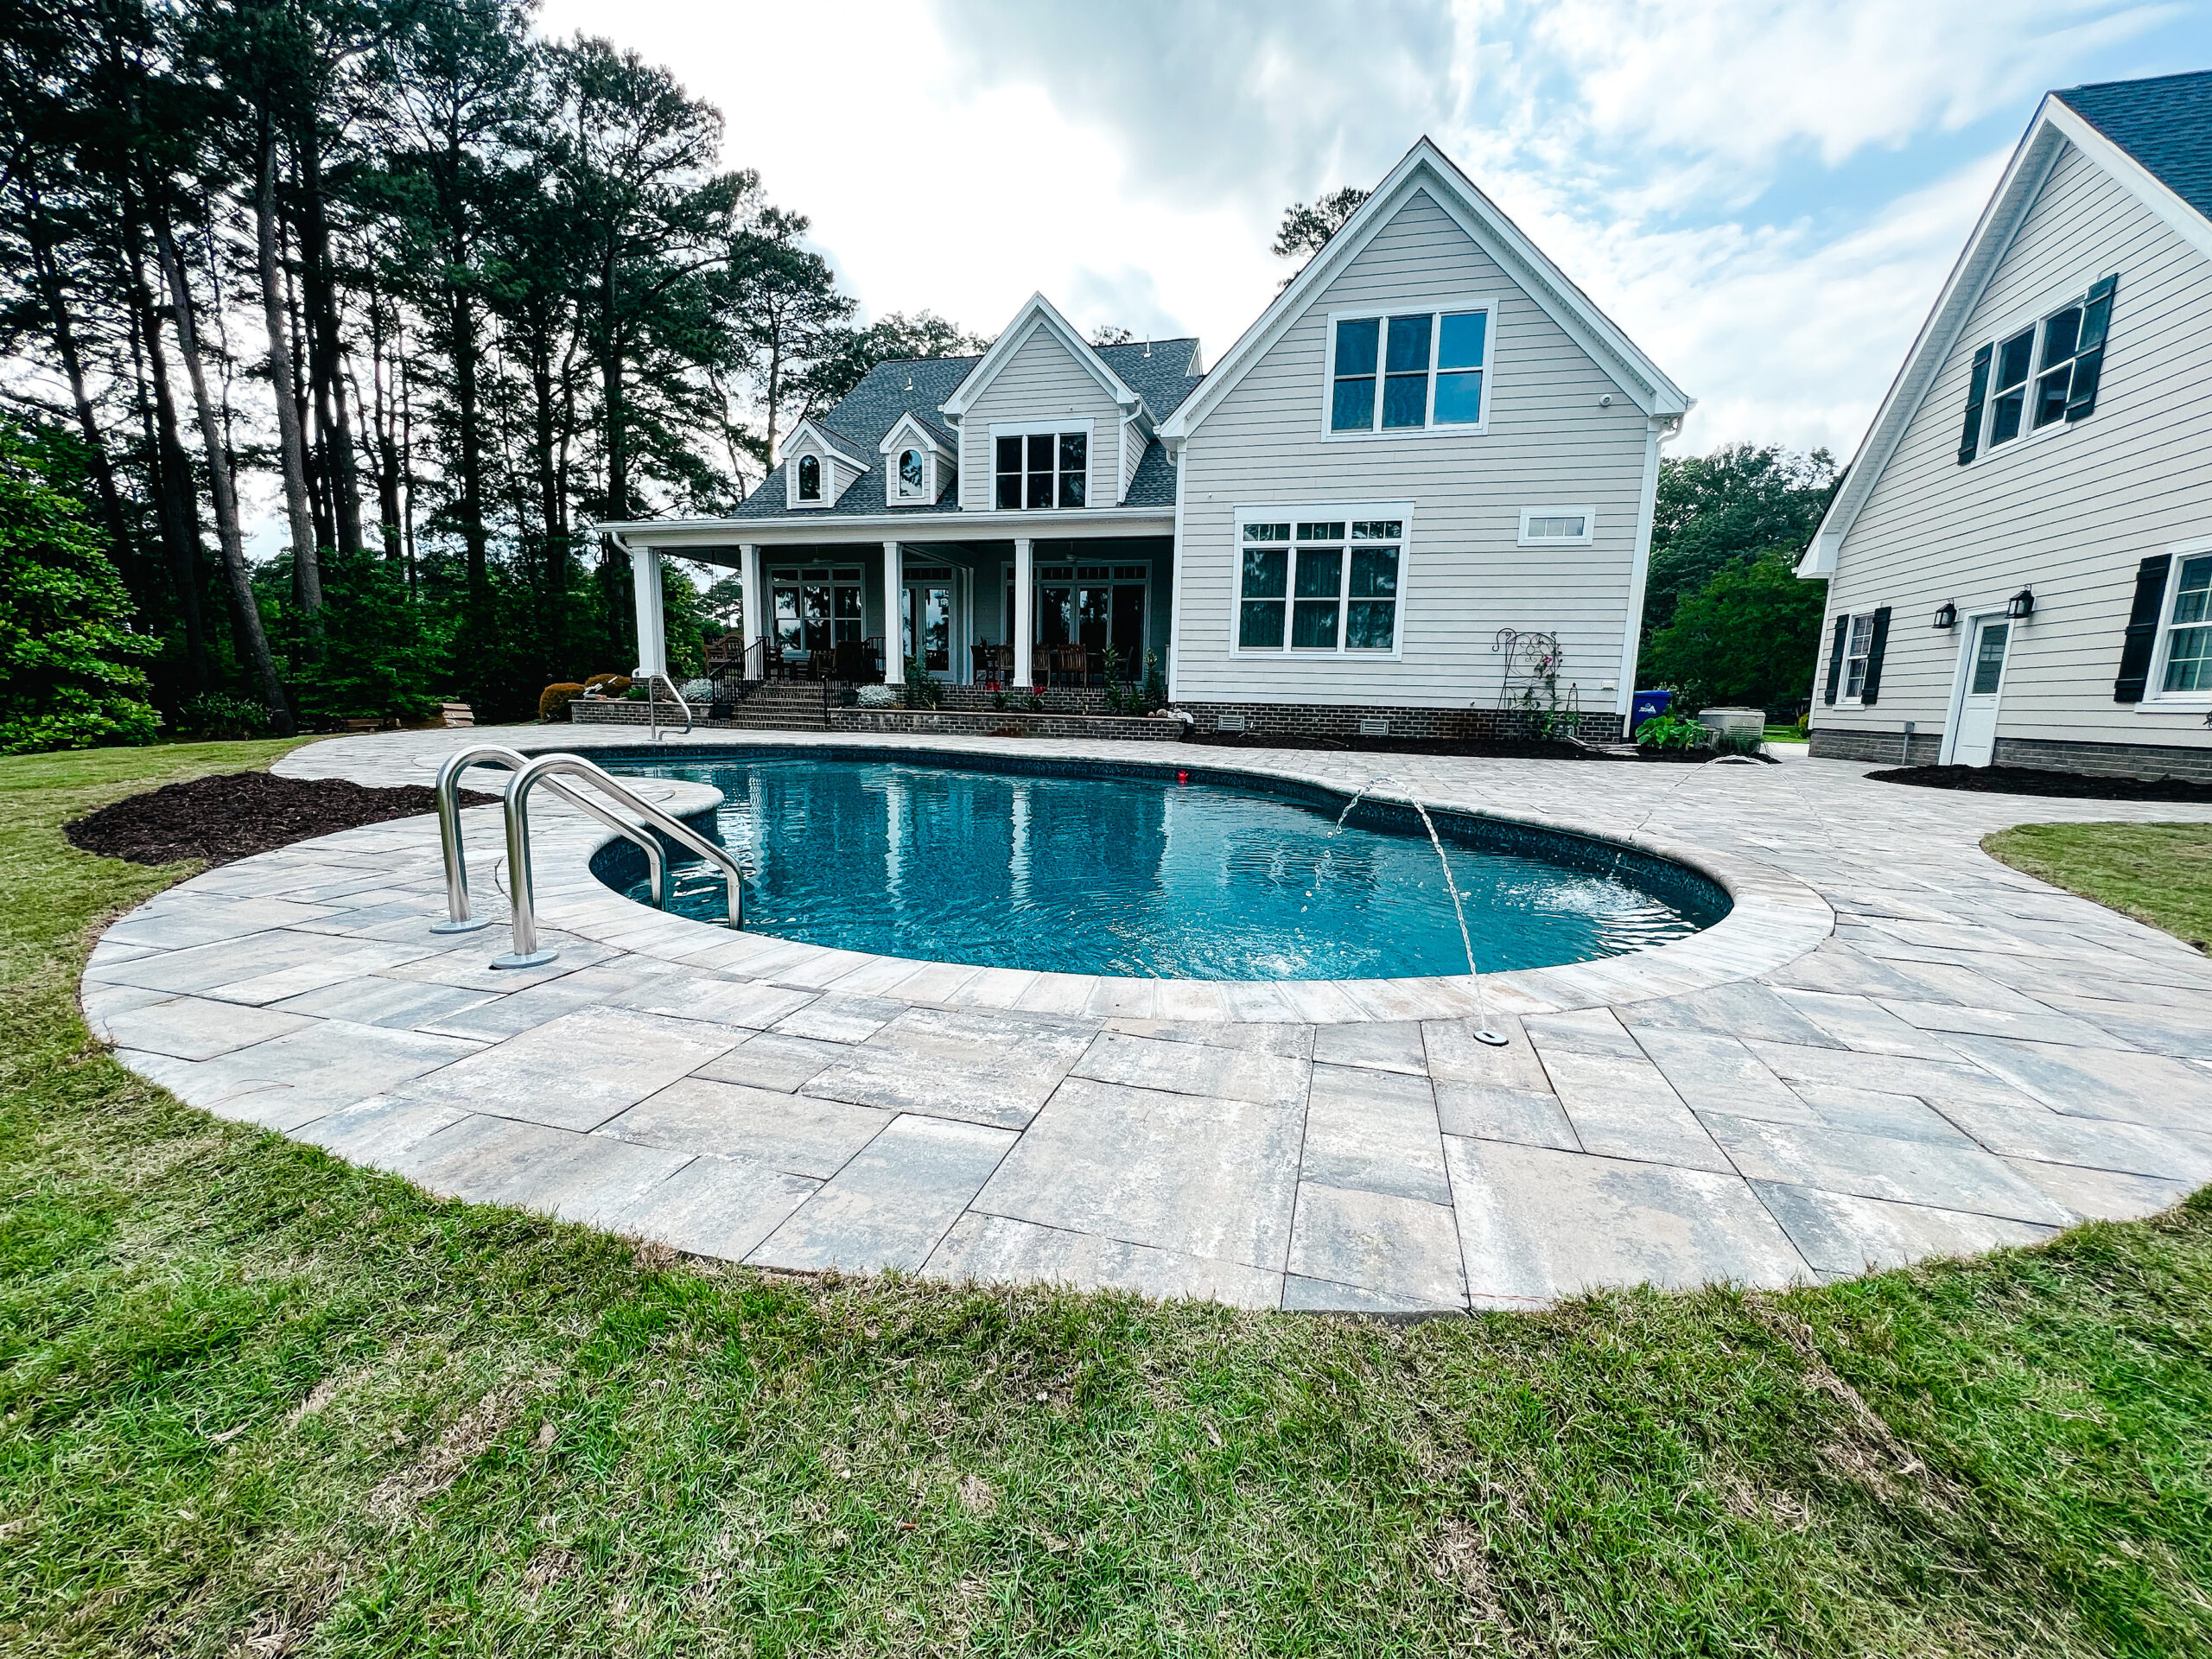 in-ground pool with house in background